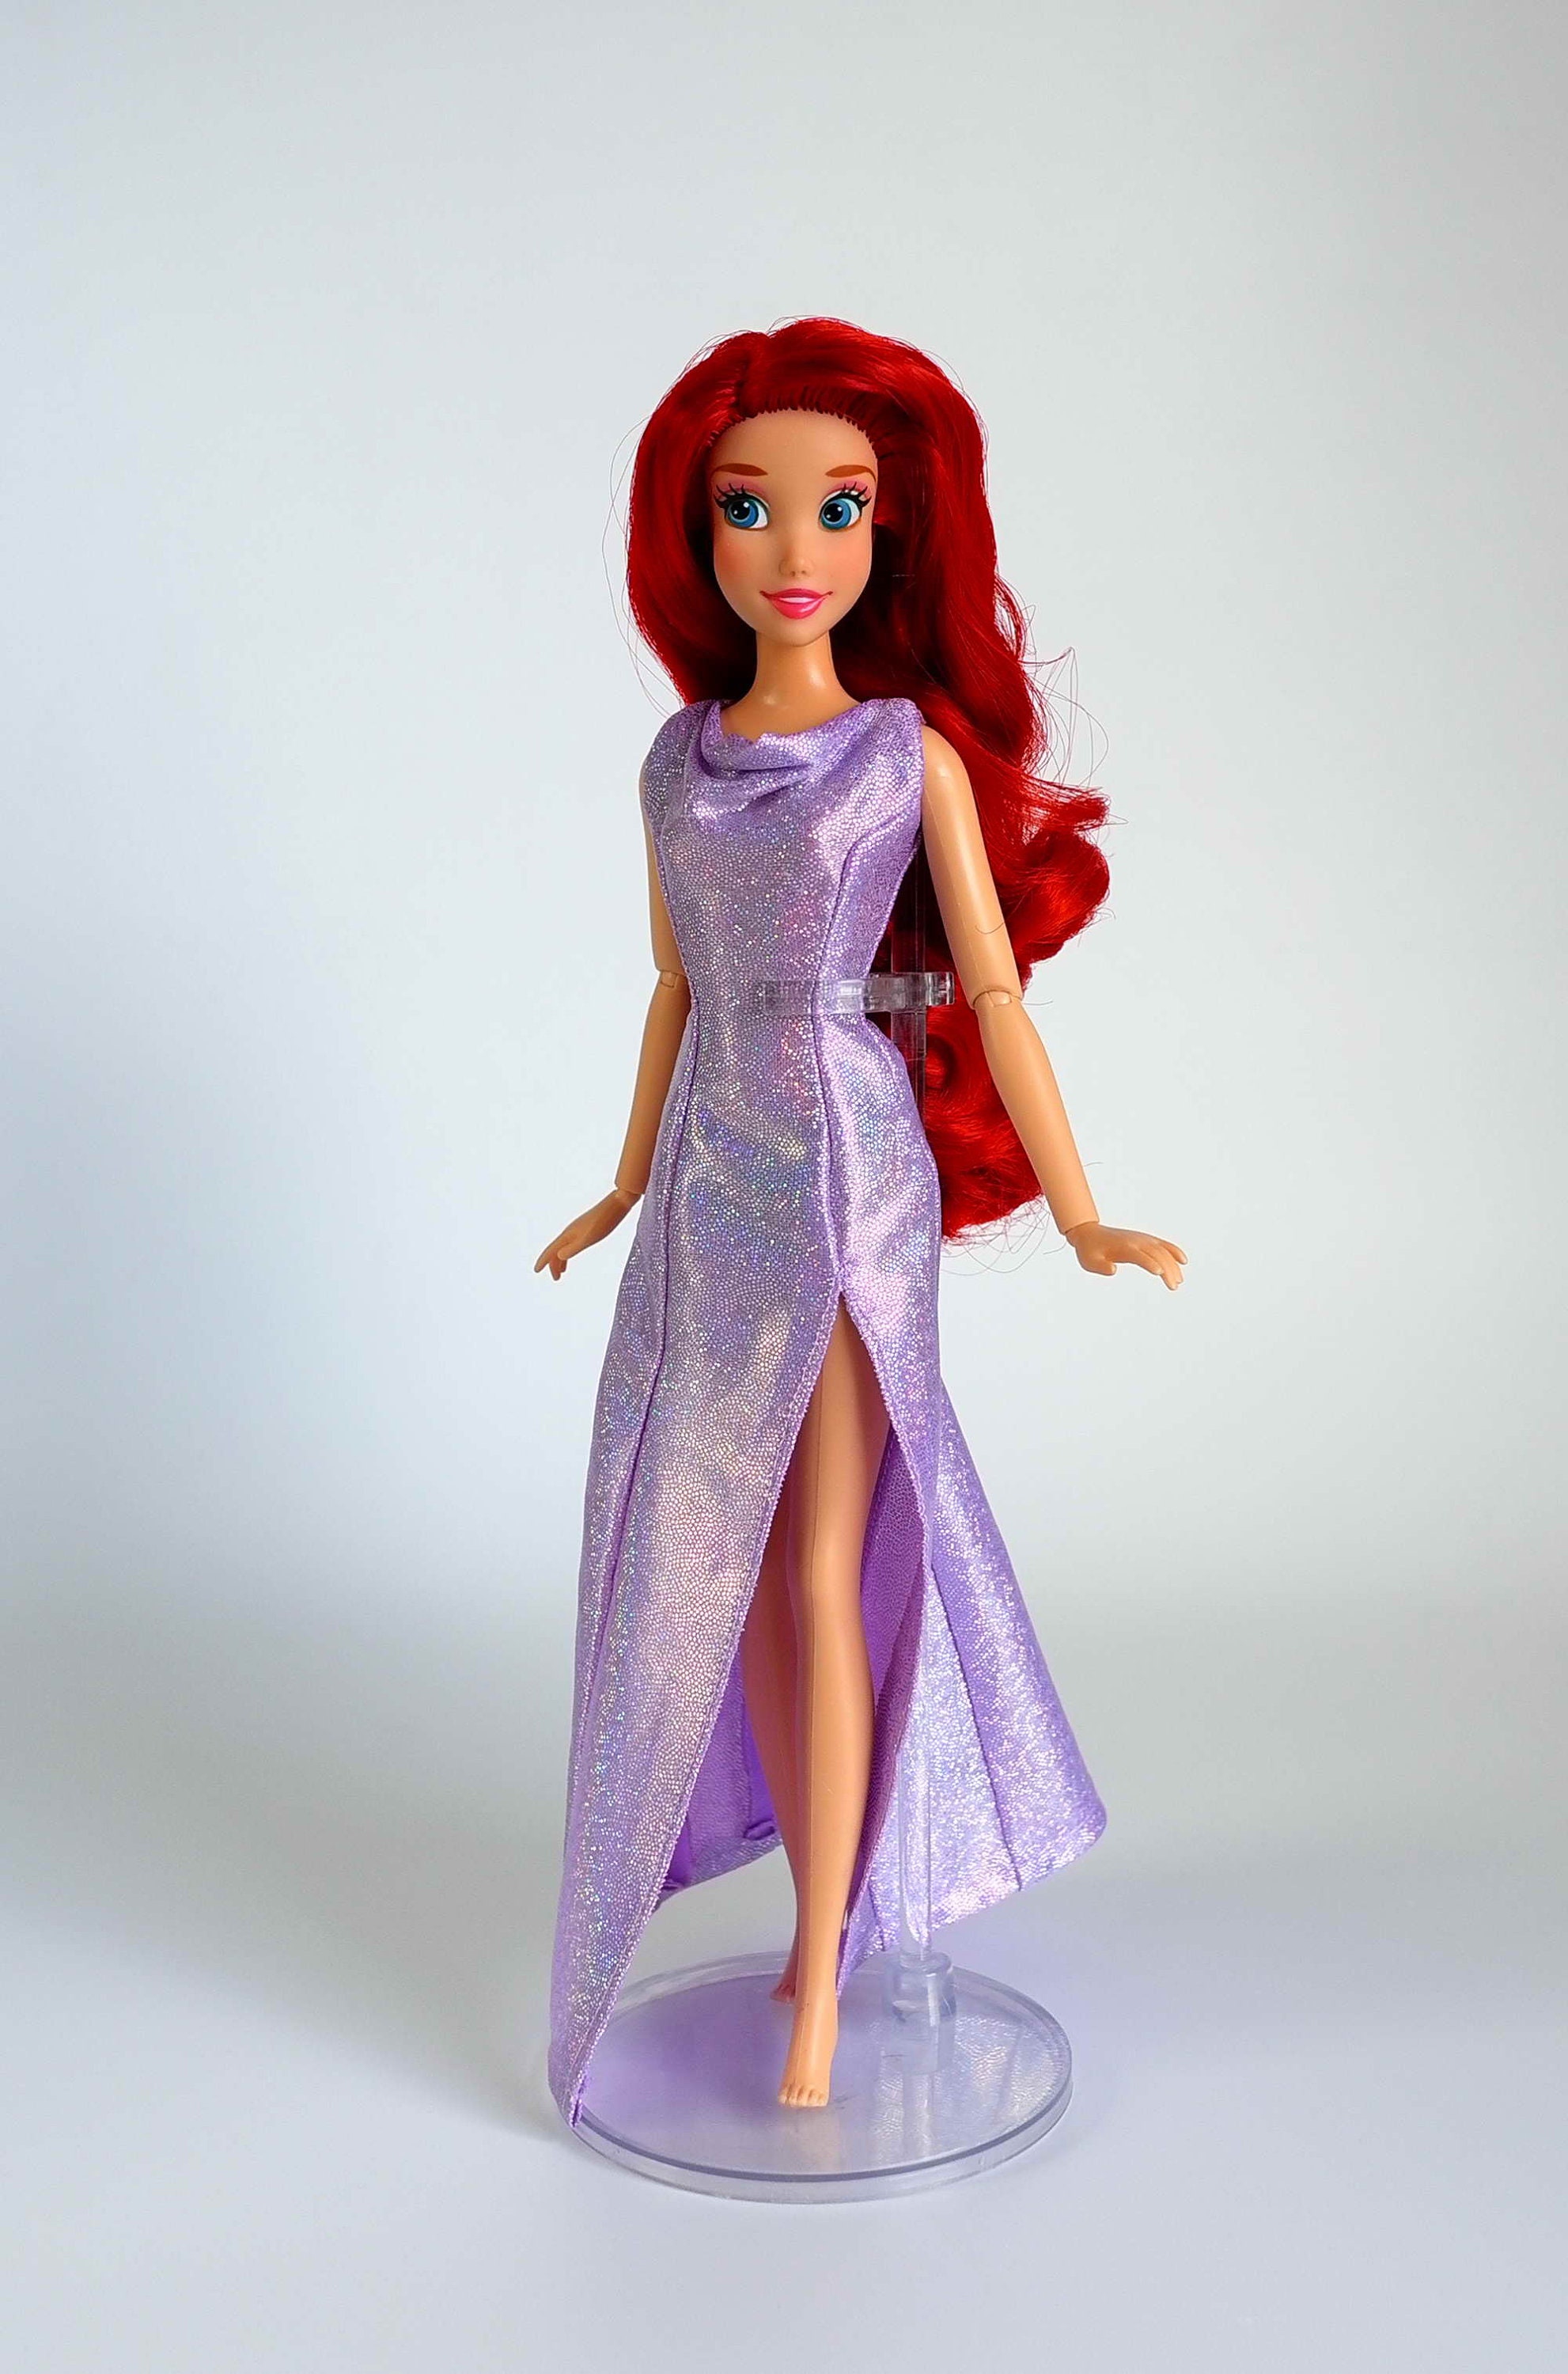 #2 fits 11.5 inches or 17 inches Dolls like Disney Princess Classic Dolls or Classic Singing Dolls. Ariel inspired dress Blue